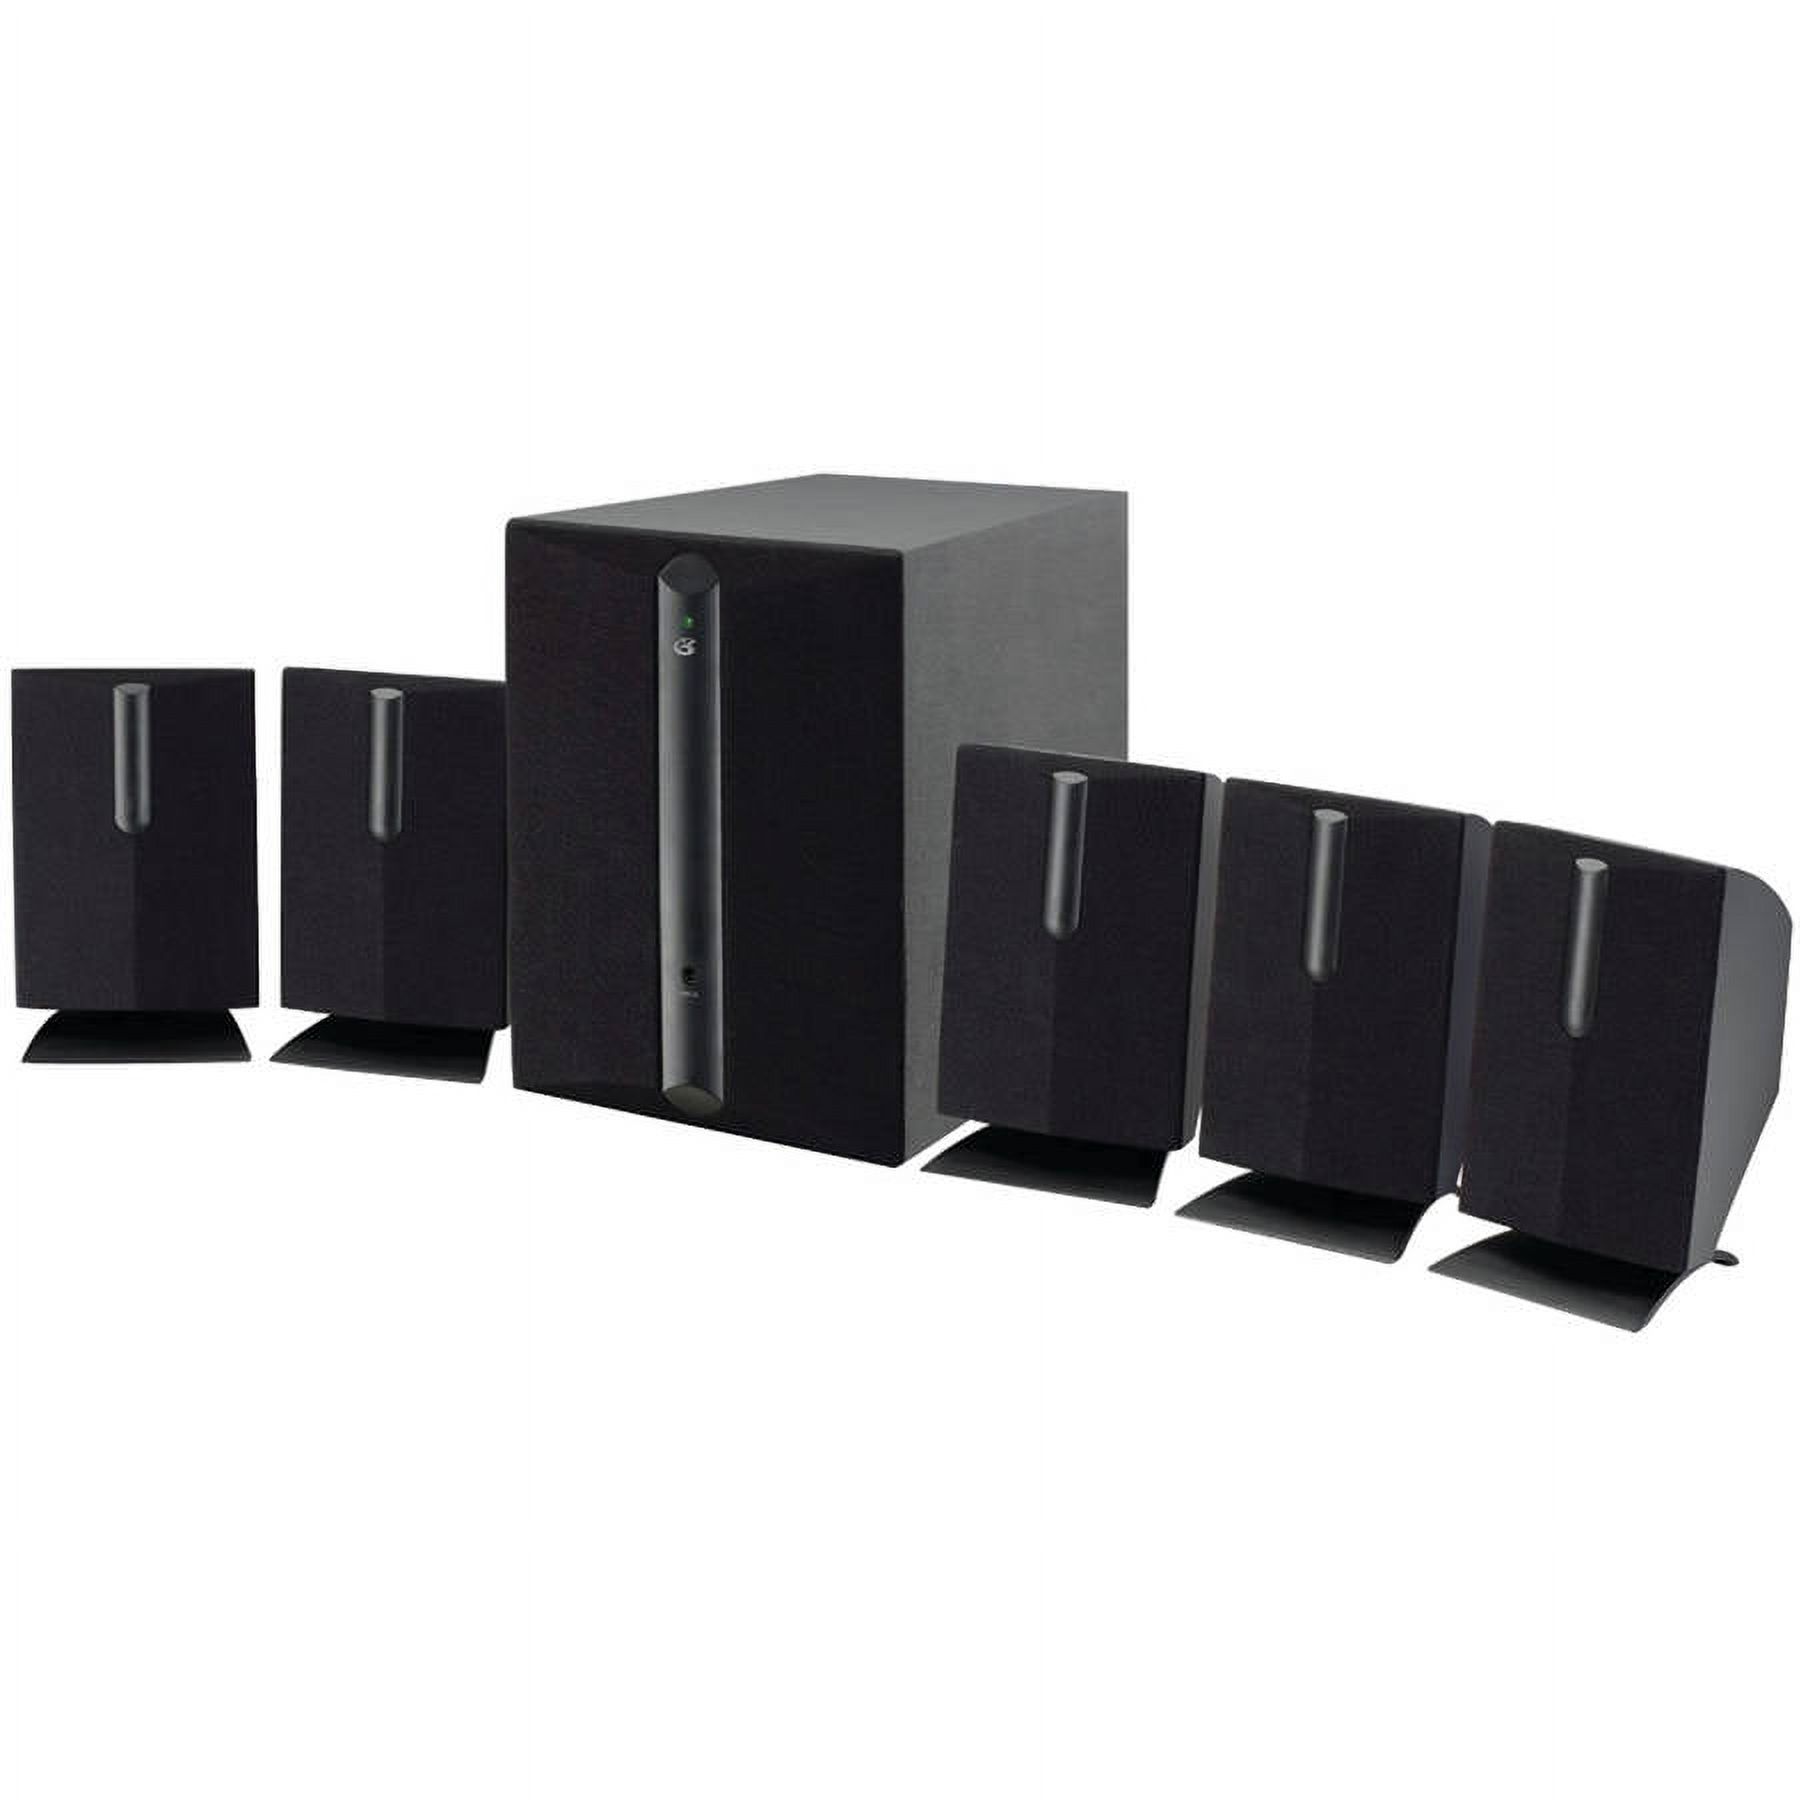 GPX HT050B 5.1-Channel Home Theater Speaker System - image 1 of 3